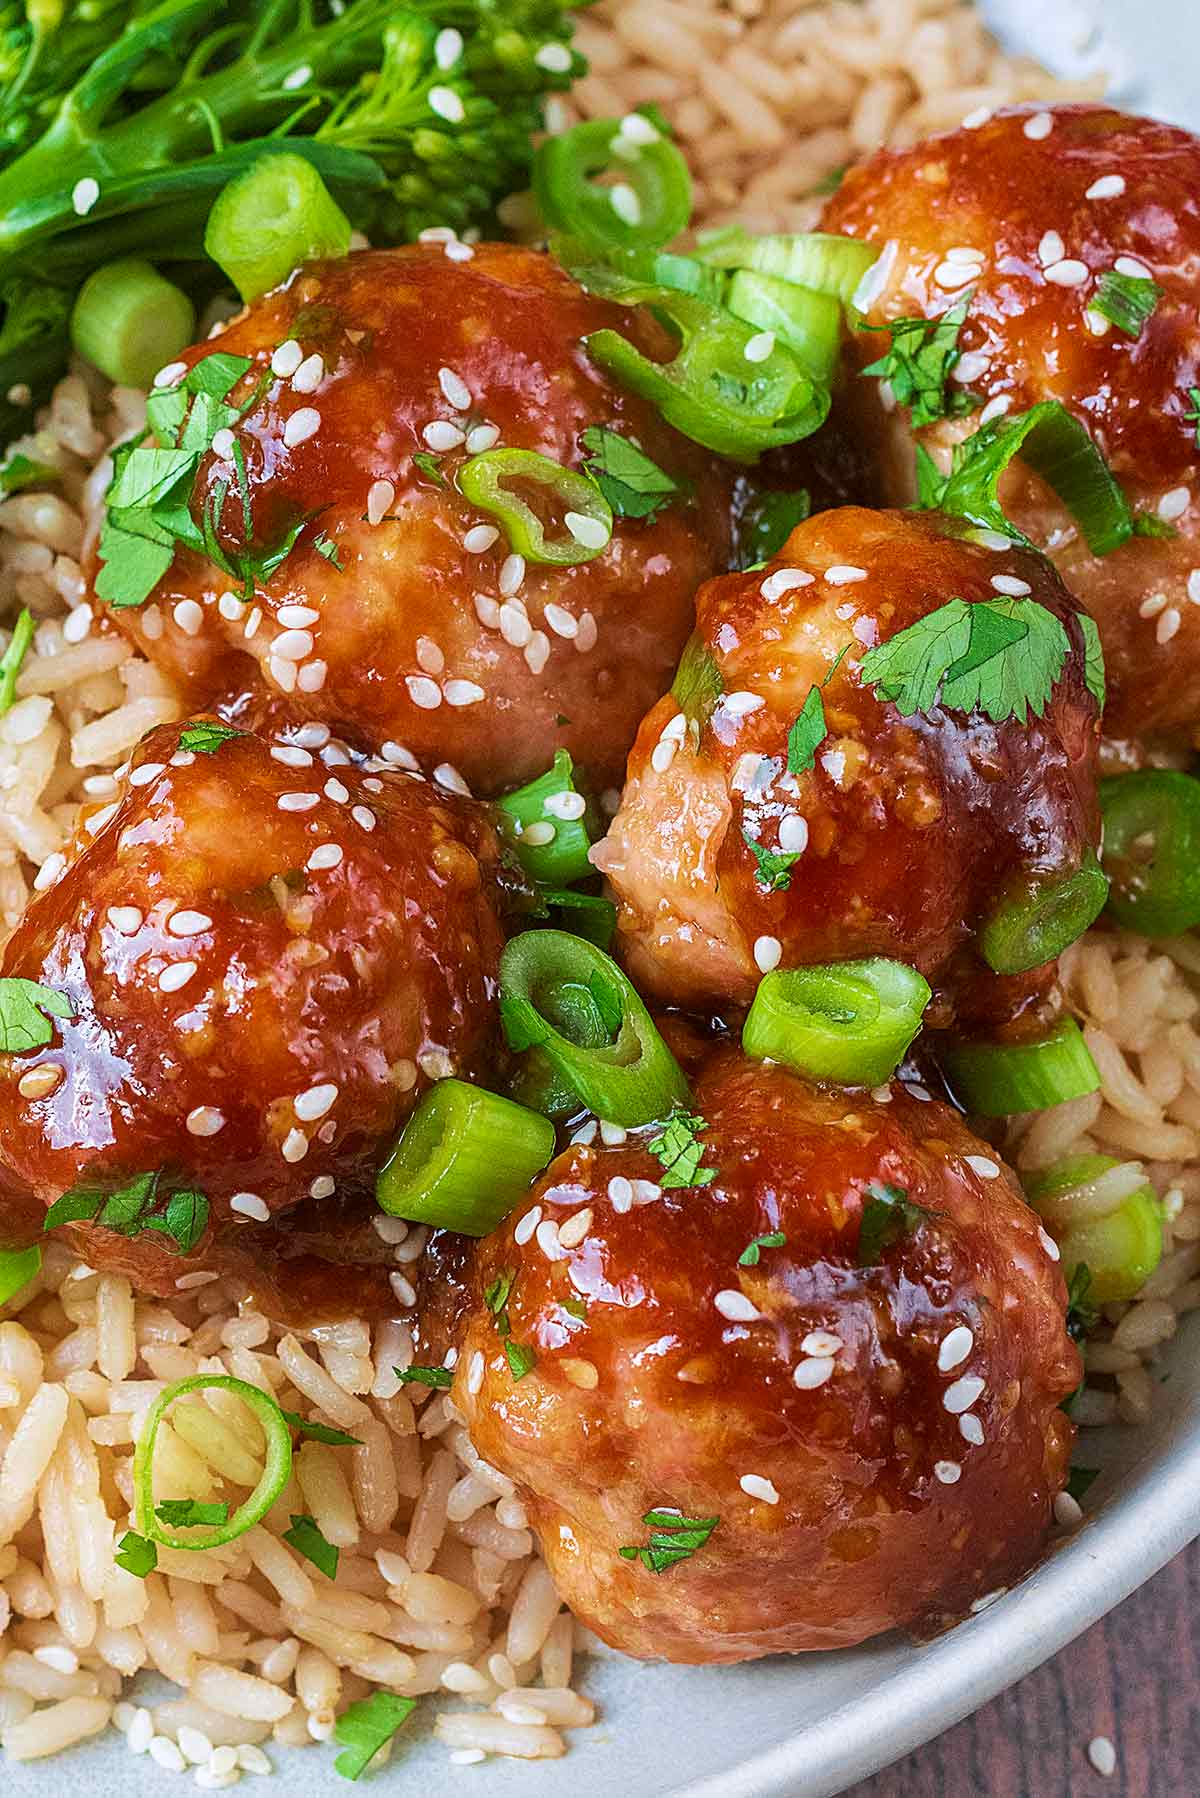 Cooked chicken meatballs coated in sauce topped with spring onions and sesame seeds.